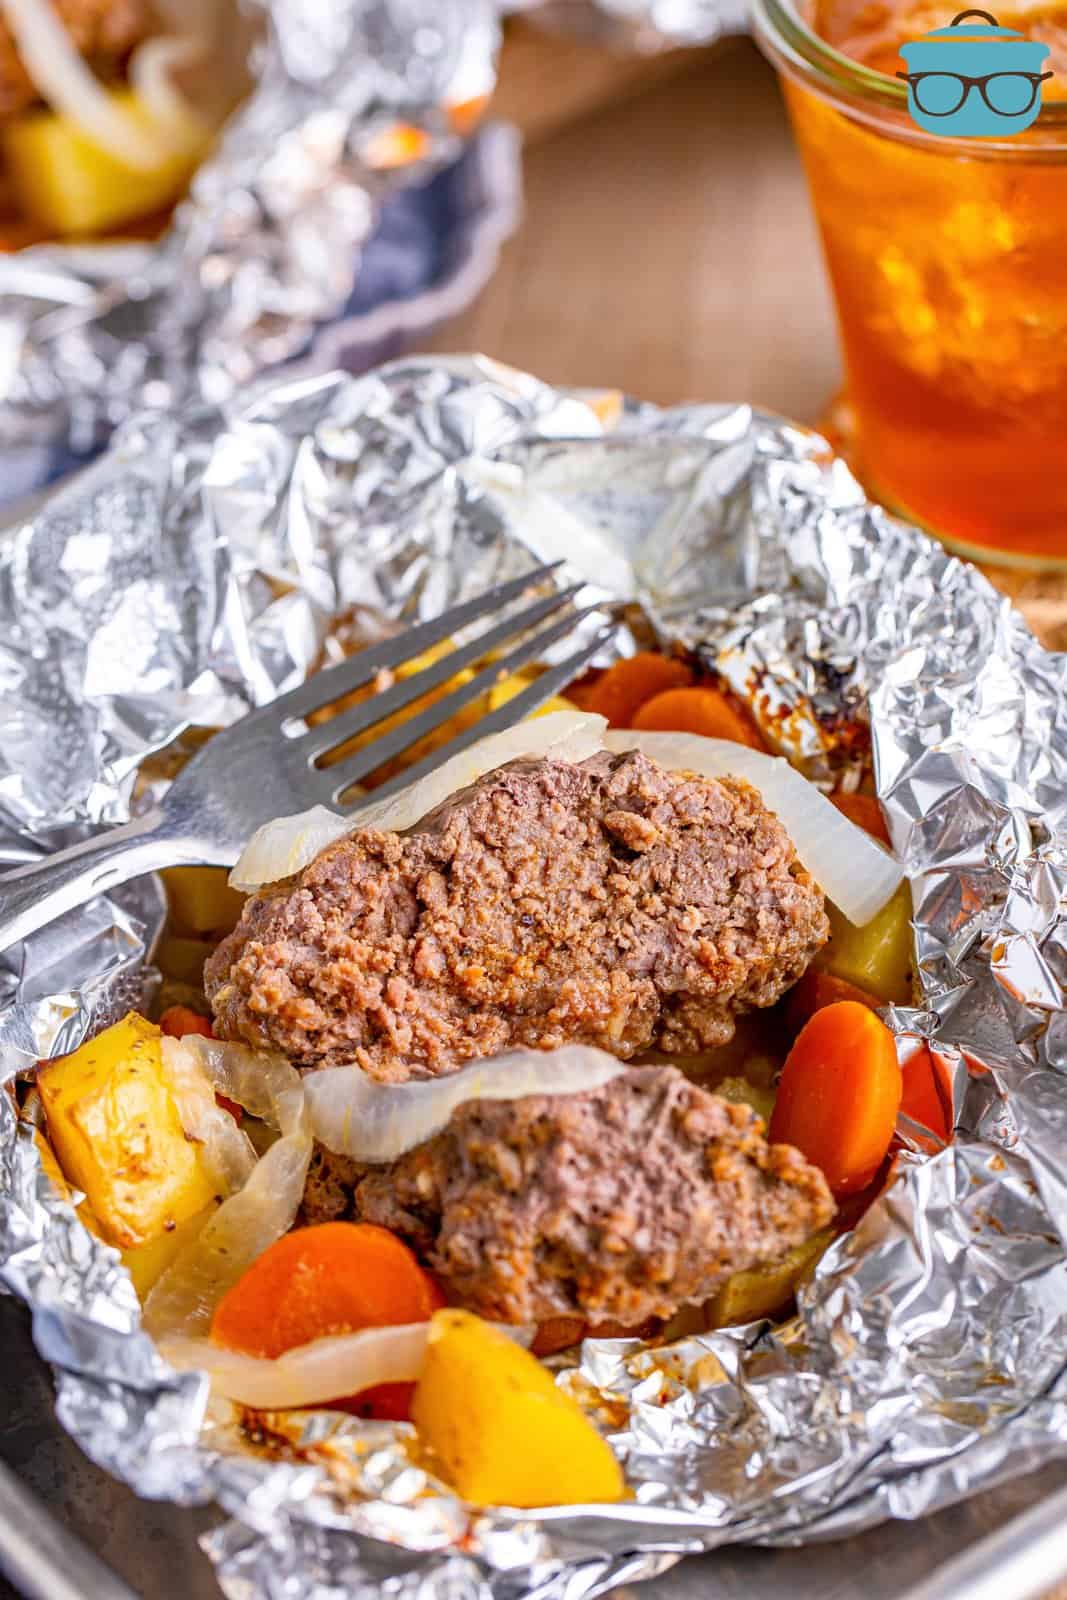 Aluminum foil packet with a burger patty, potatoes and carrots.